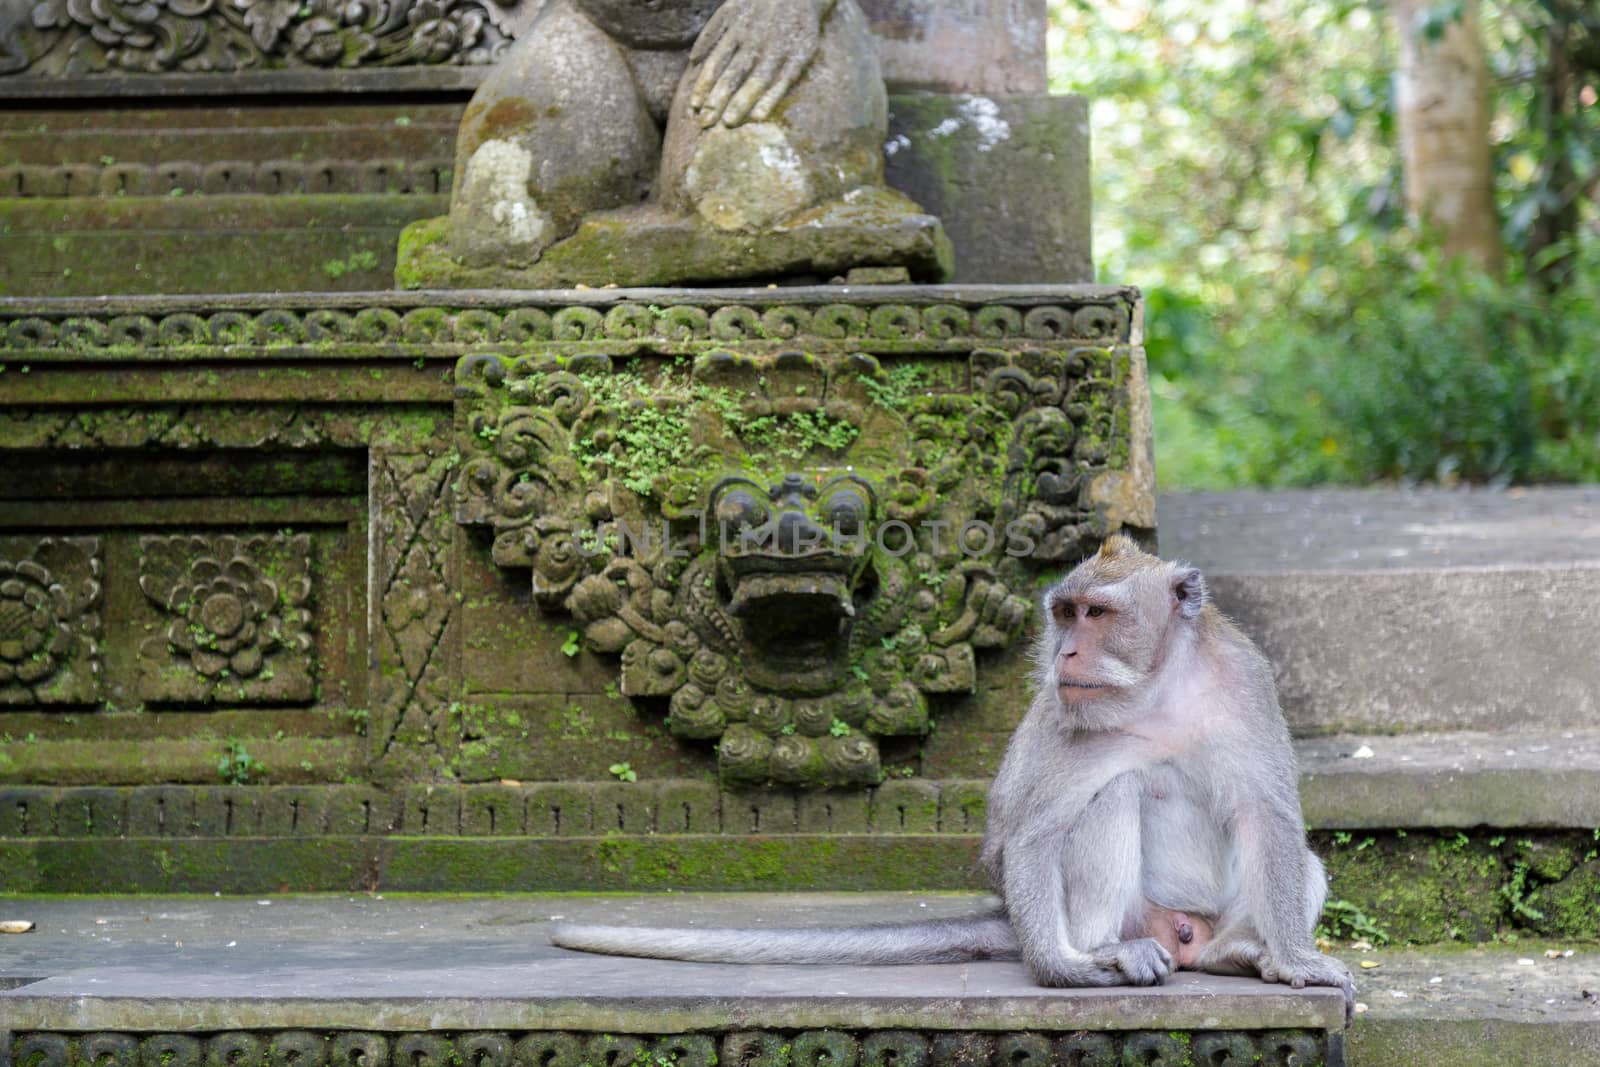 Monkey seat on an old stone temple. Concept of animal care, travel and wildlife observation.